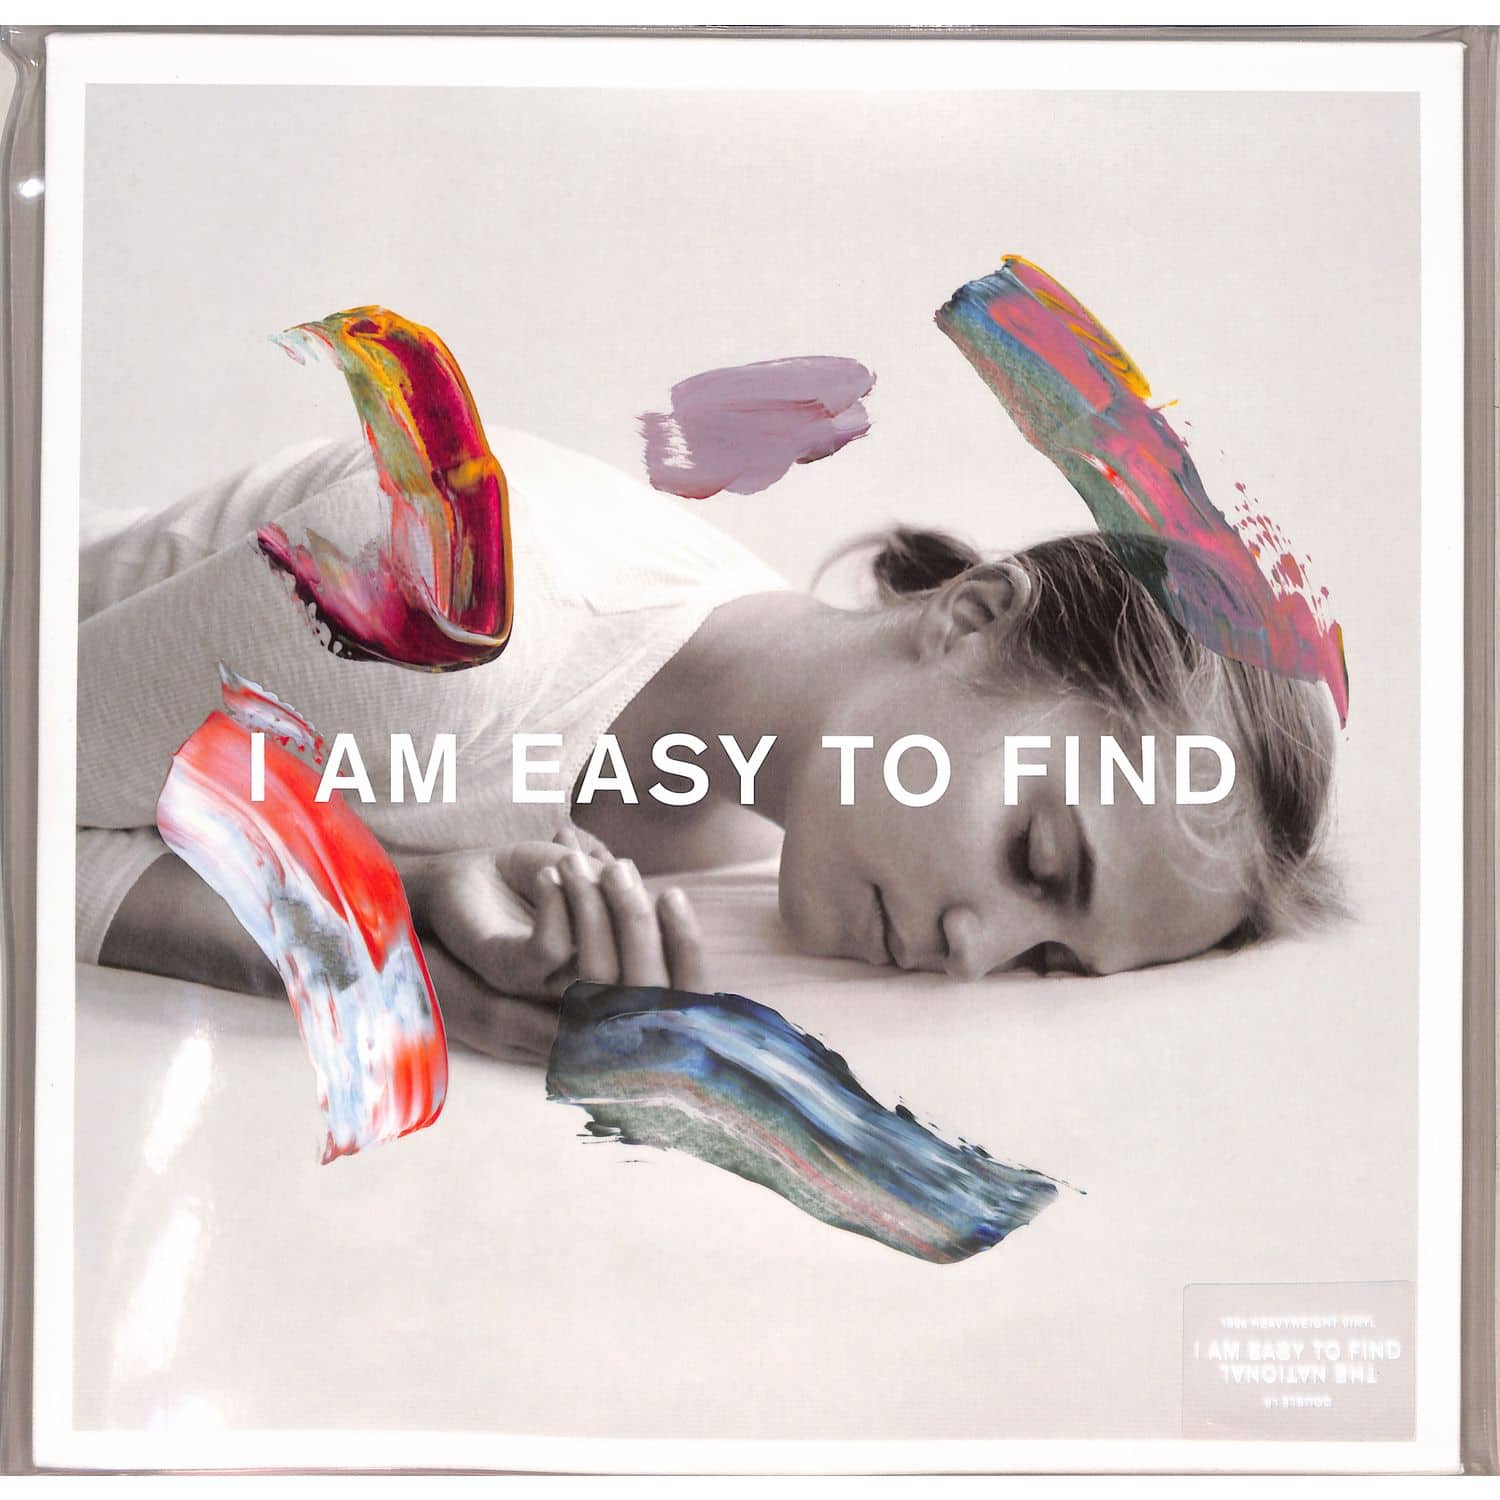 The National - I AM EASY TO FIND 